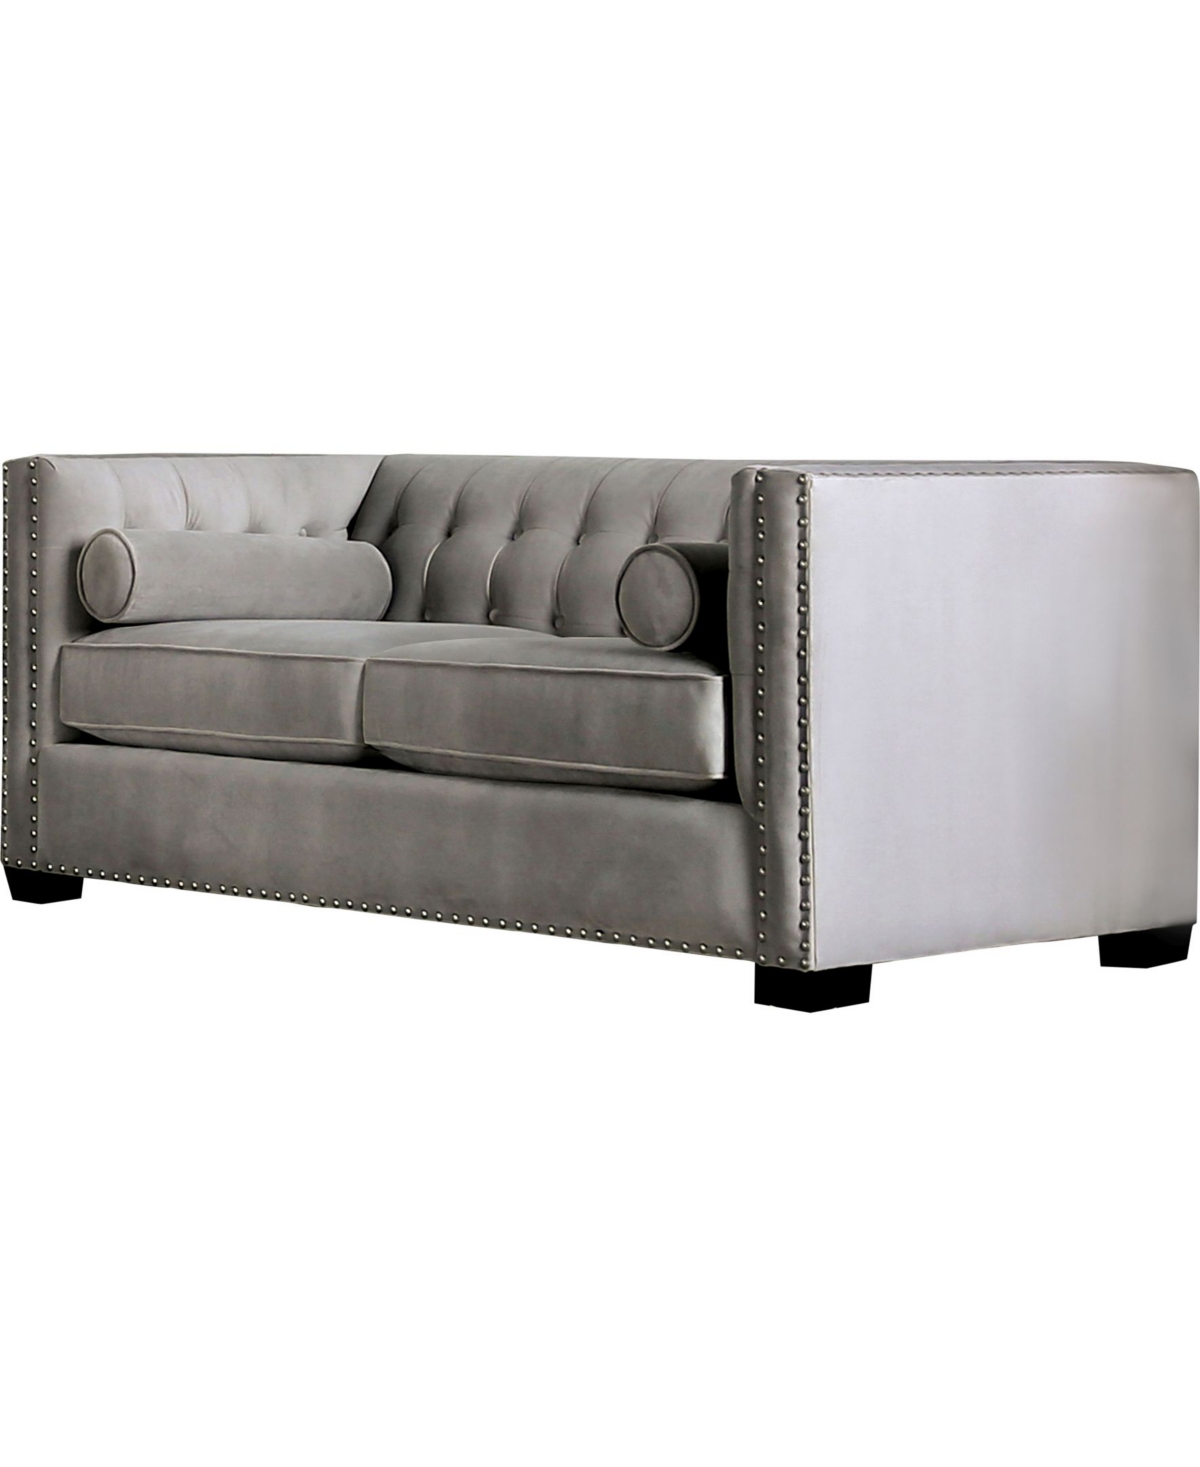 of America Cantar Upholstered Love Seat